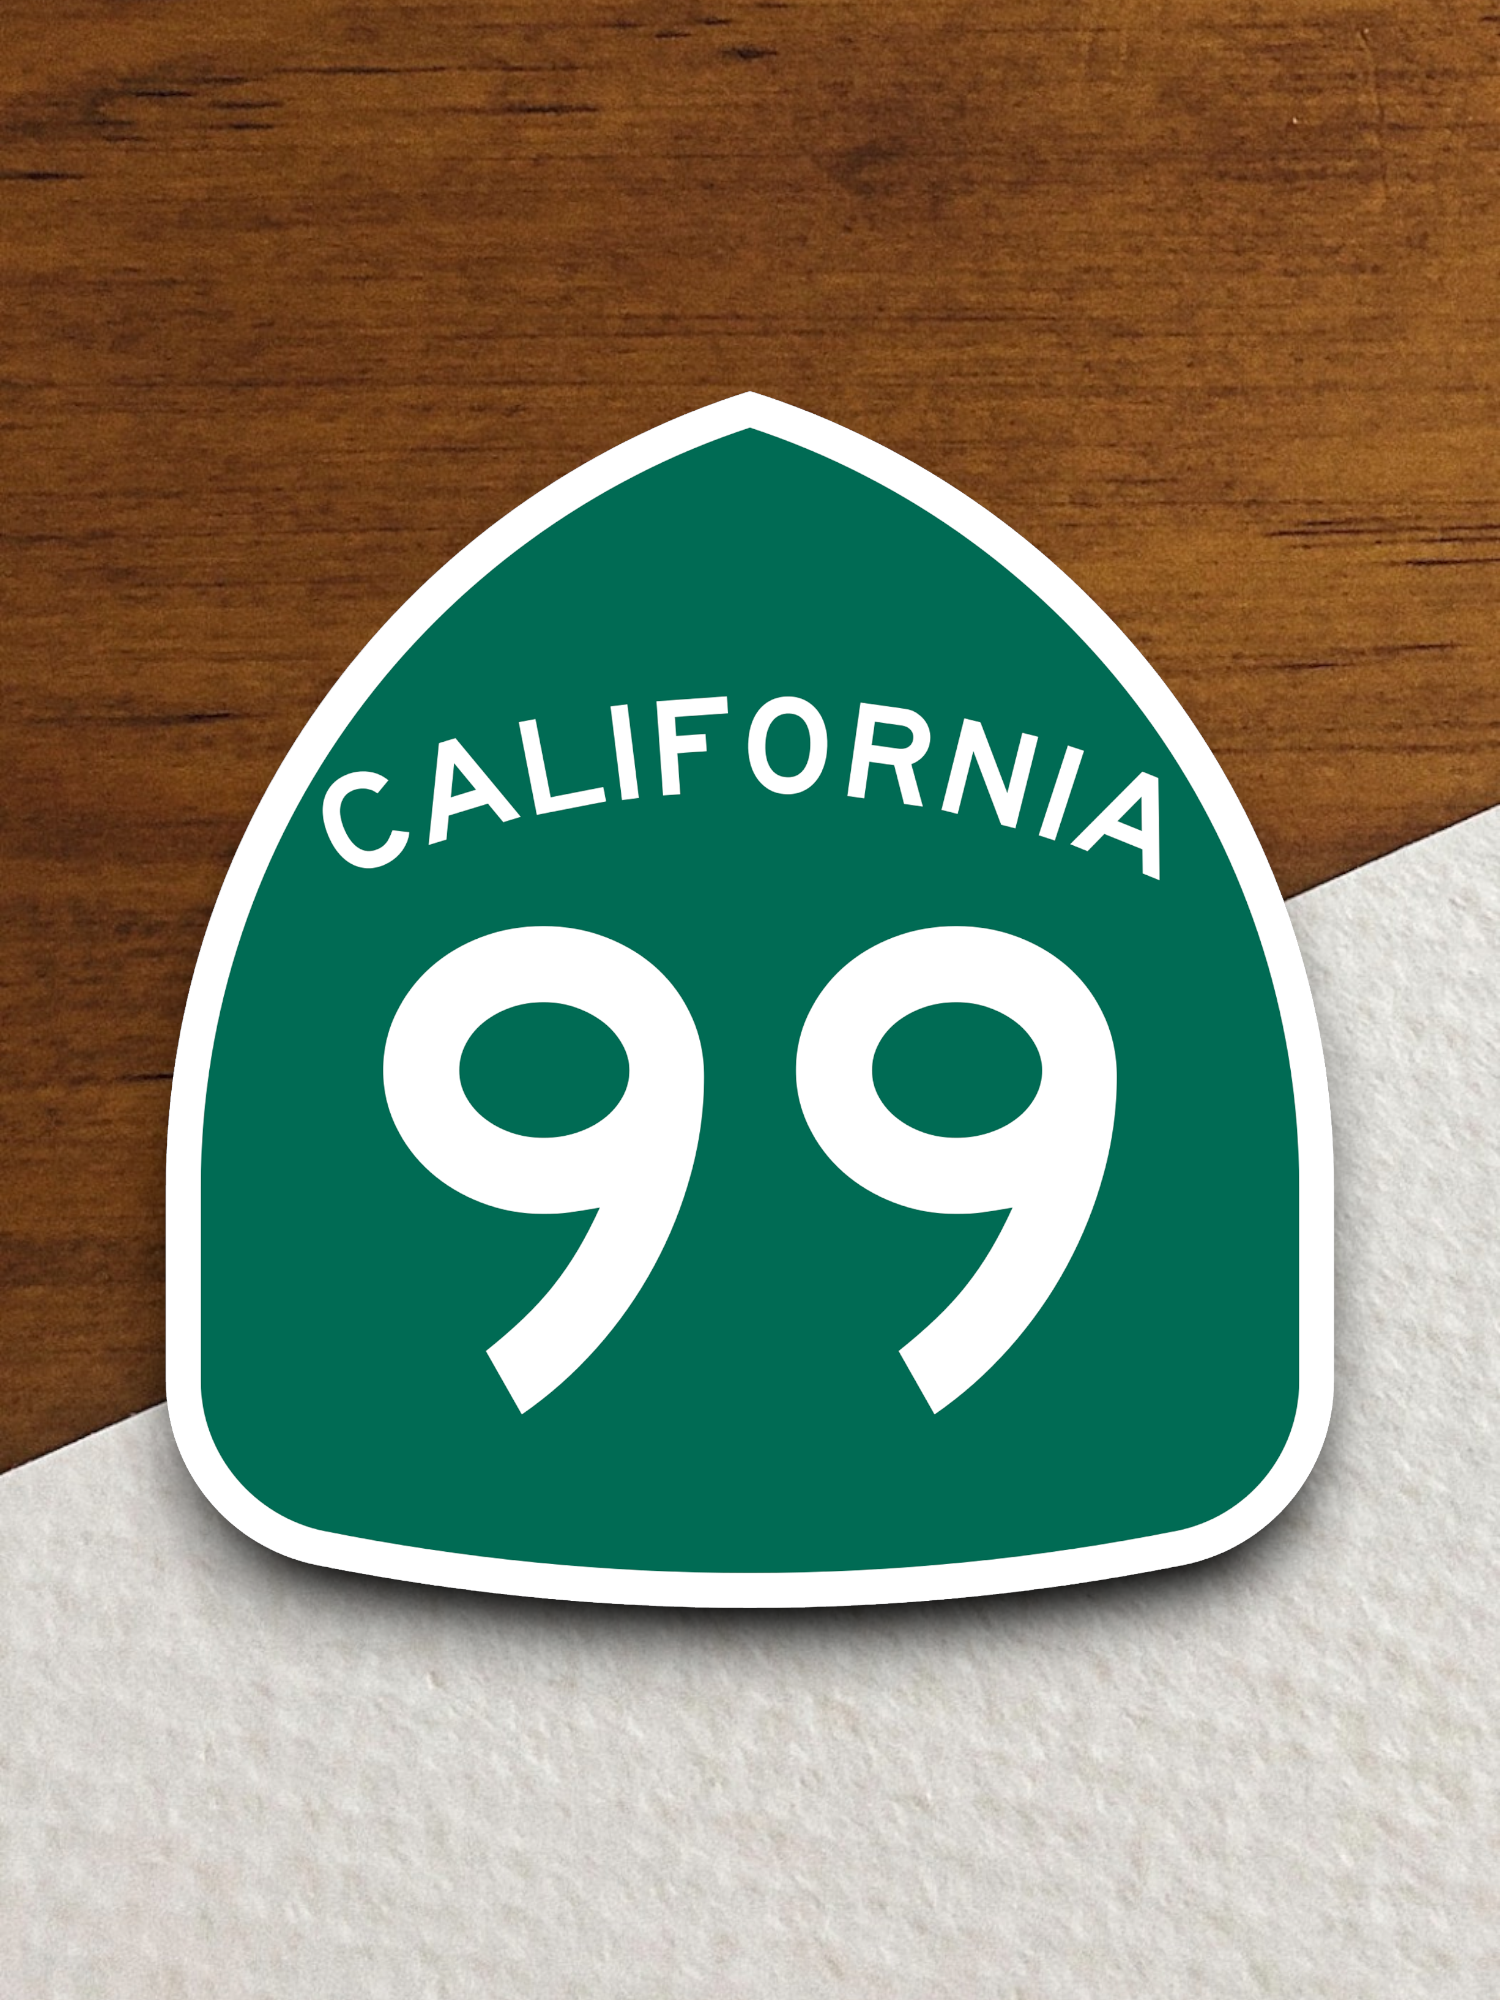 California State Route 99 Road Sign Sticker